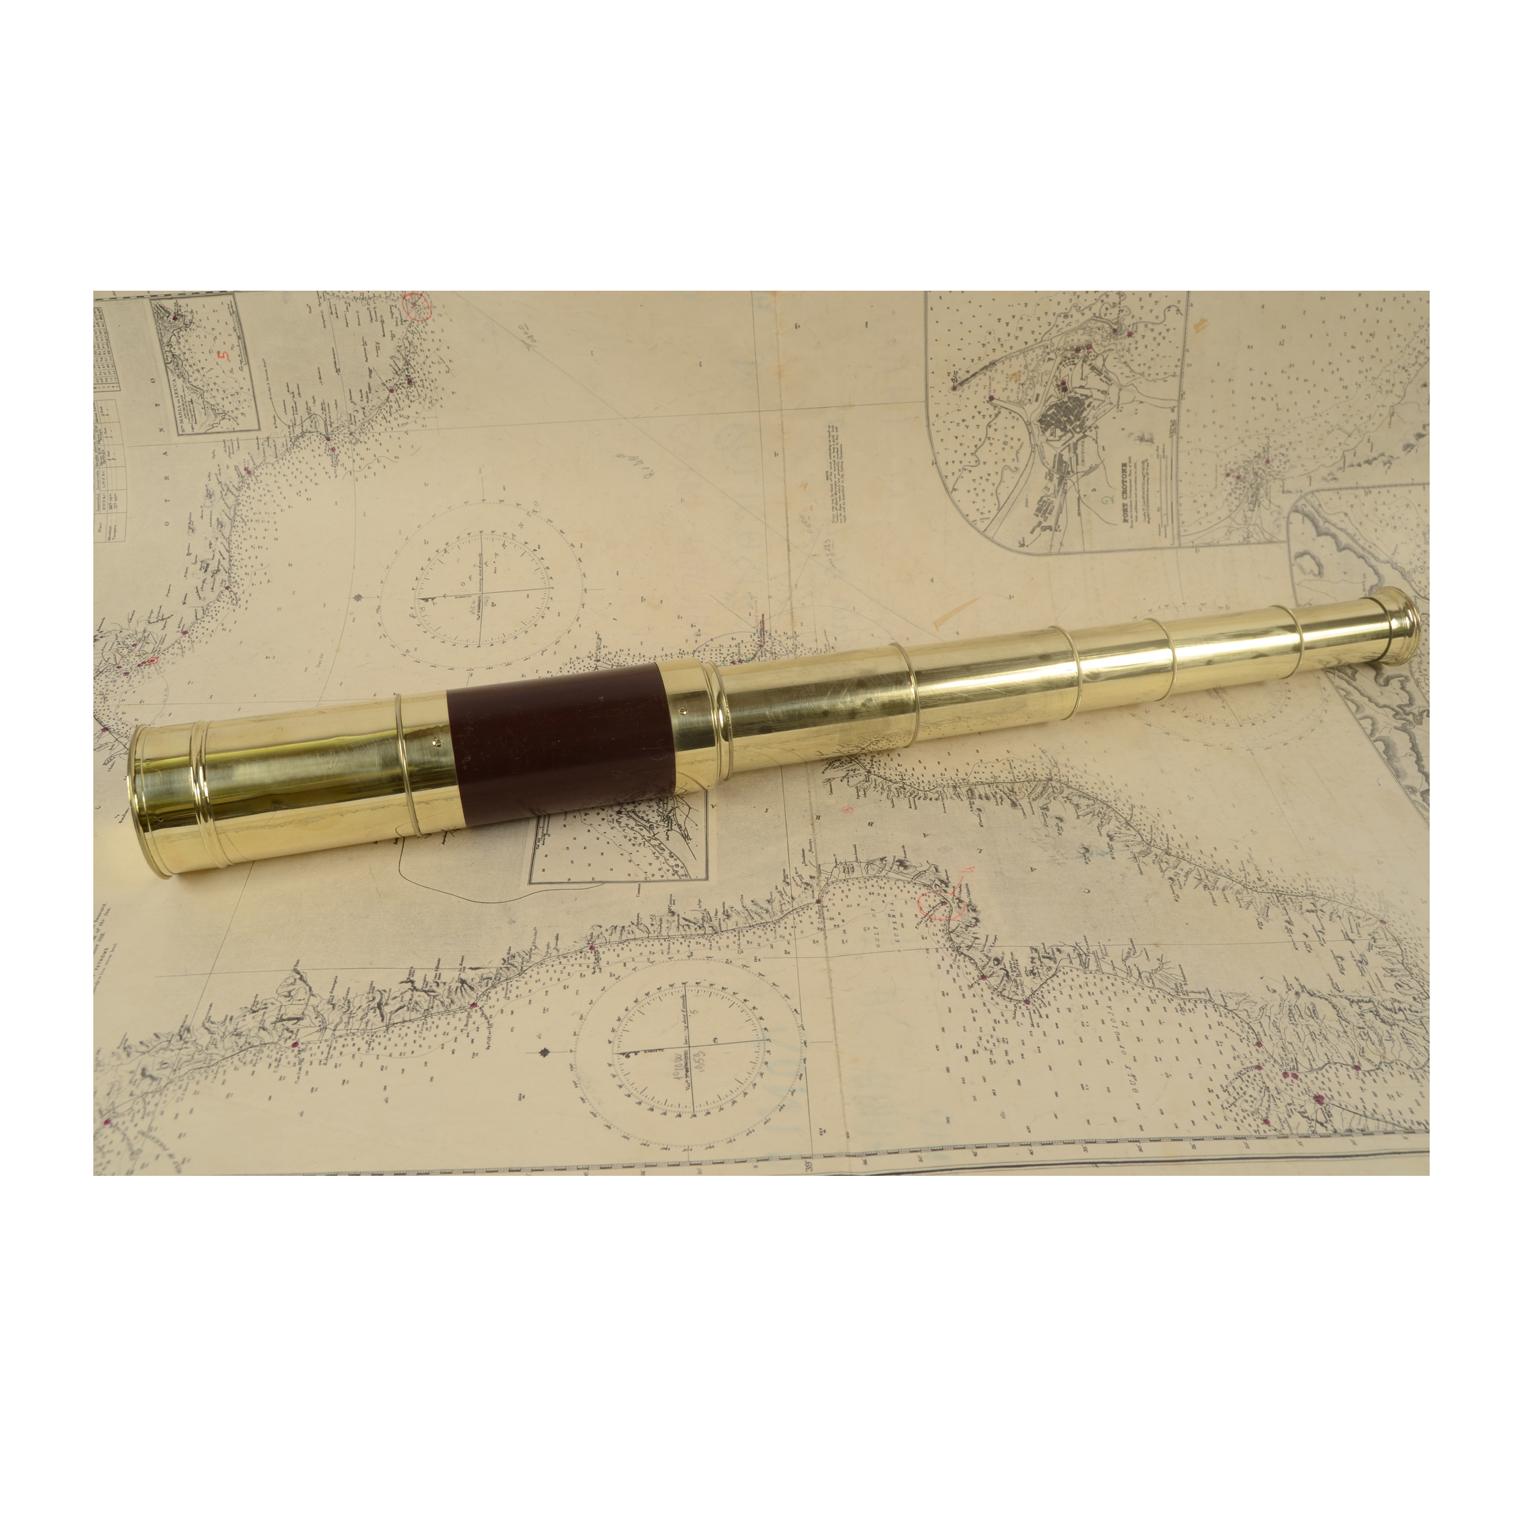 Large brass telescope with mahogany wood handle signed A. Fries optical Genova, from the second half of the 19th century. Focus with extensions. Maximum length 131.5 cm - 51.77 inches, minimum 30 cm - 11.8 inches, focal diameter 6.5 cm - 2-55